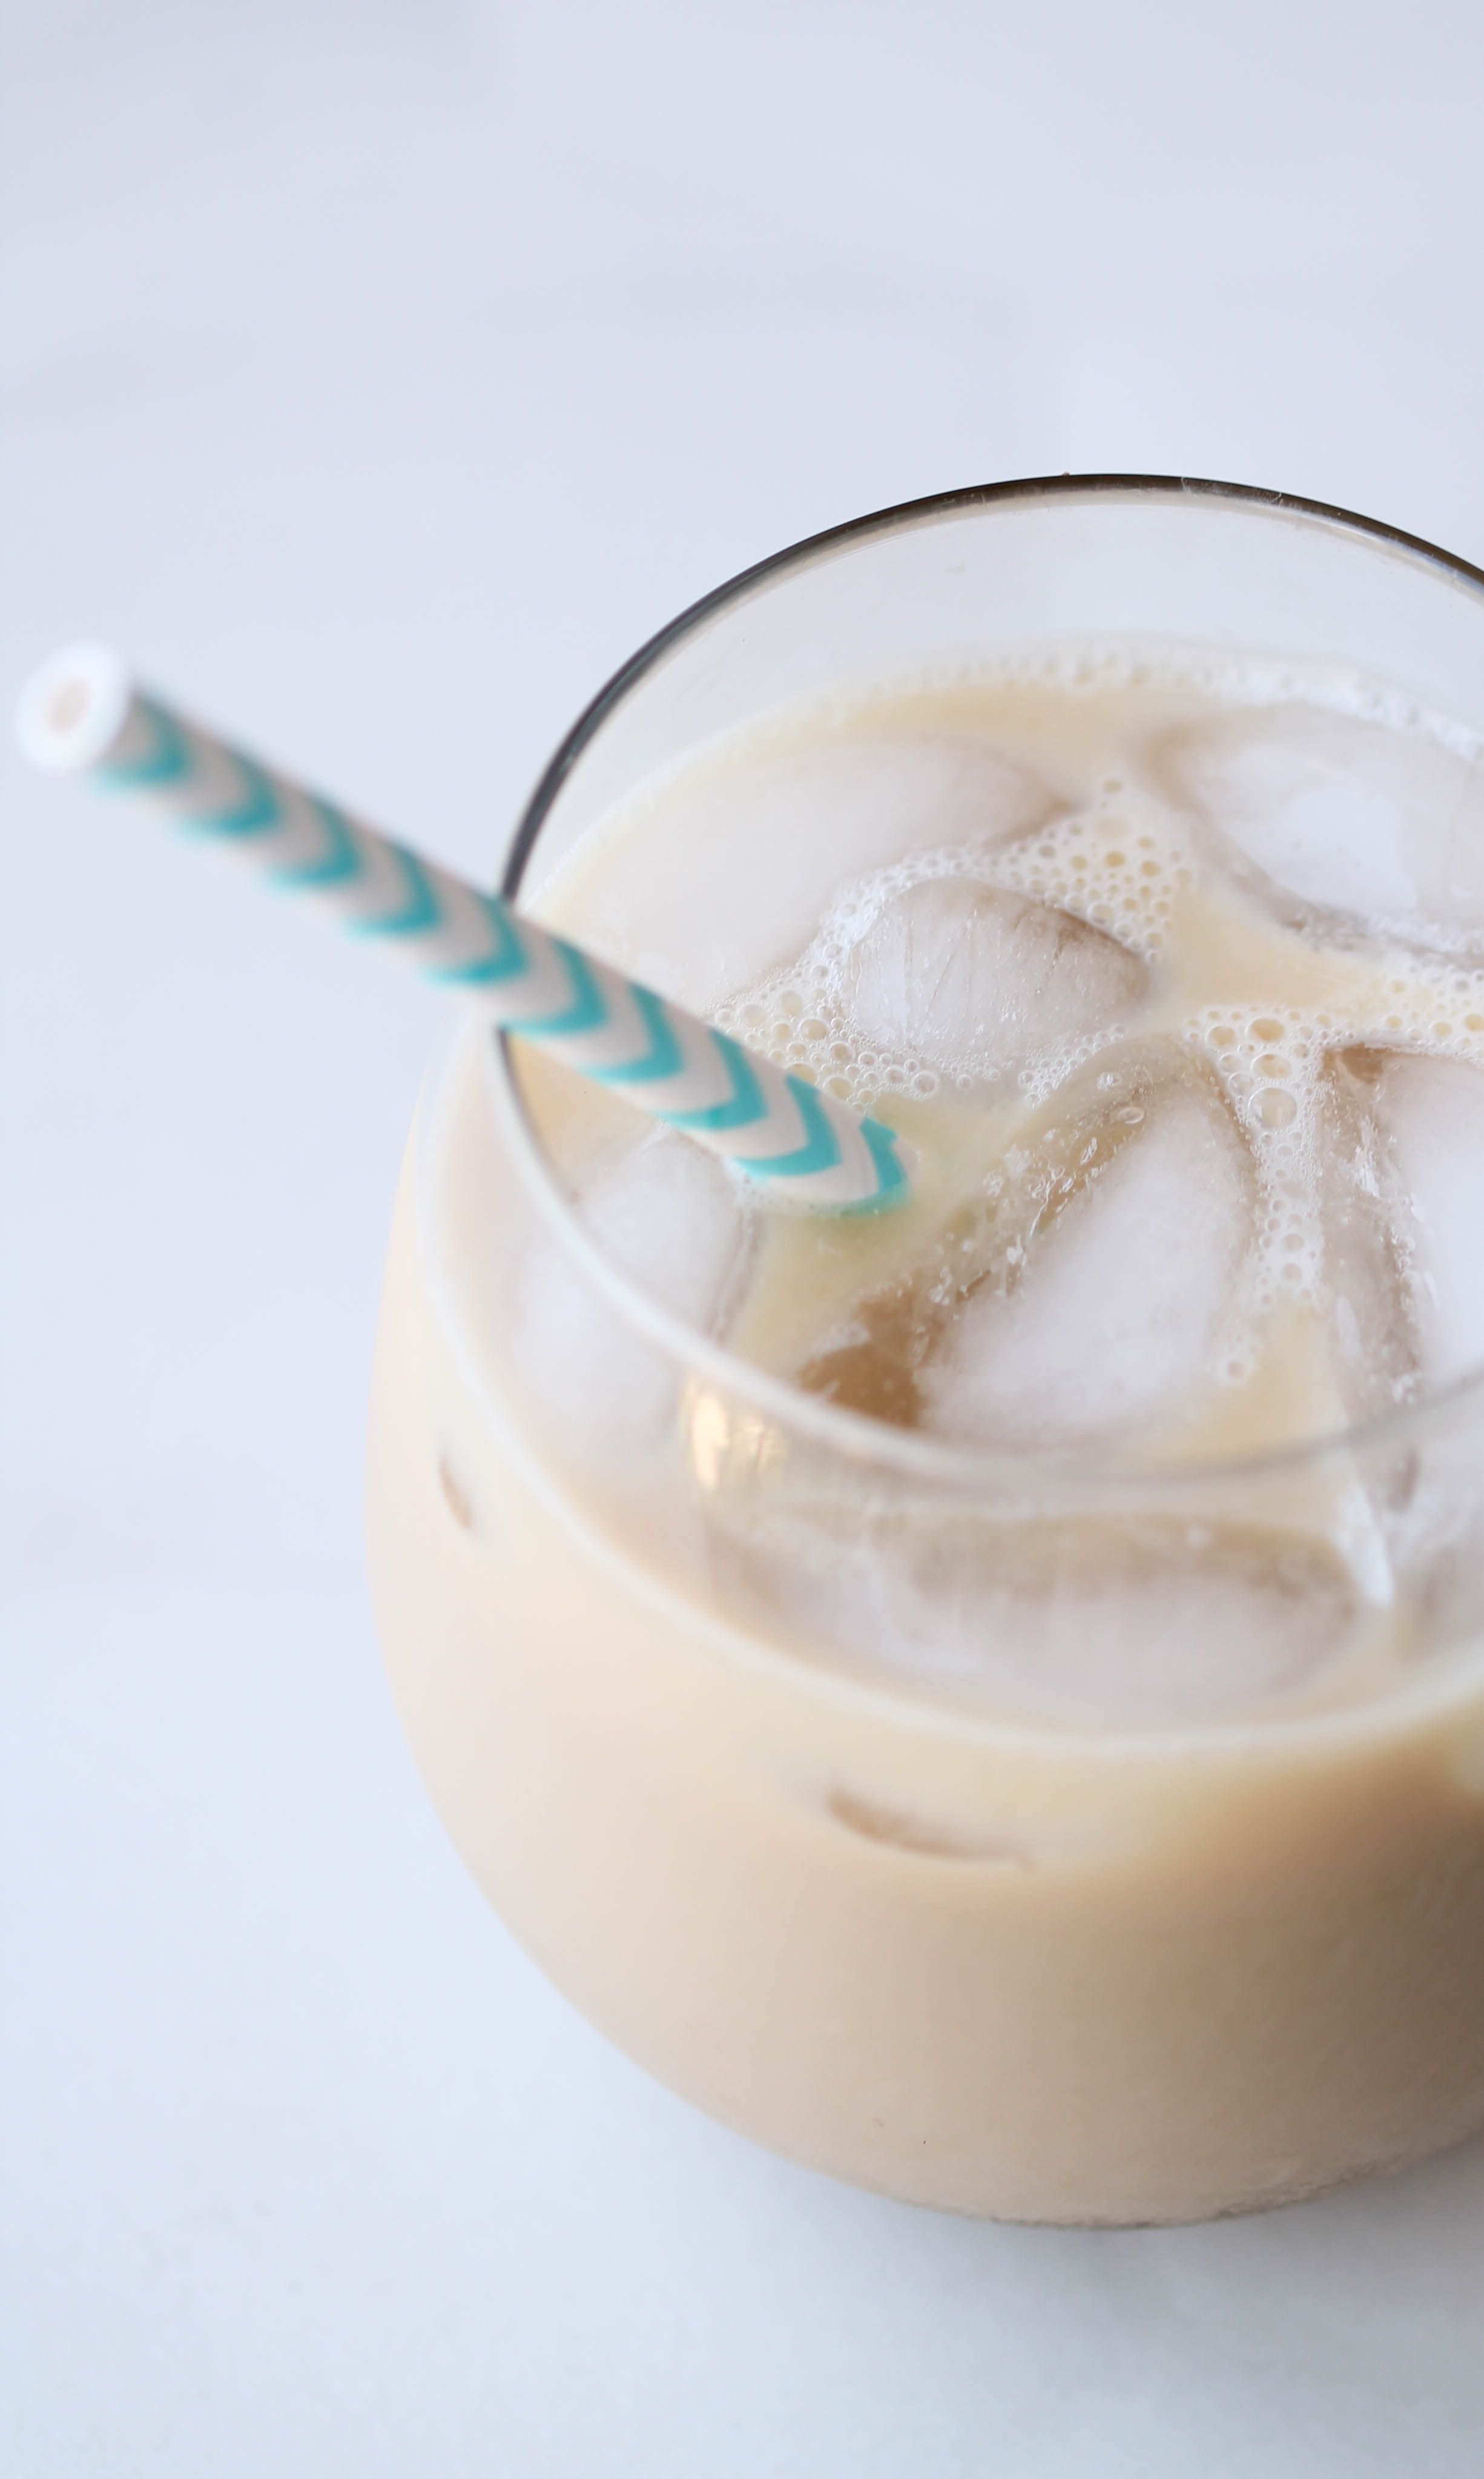 Make Instant Iced Latte in 2 minutes or less using instant coffee, sweetener and milk of your choice! It's super simple and doesn't require any fancy equipment.